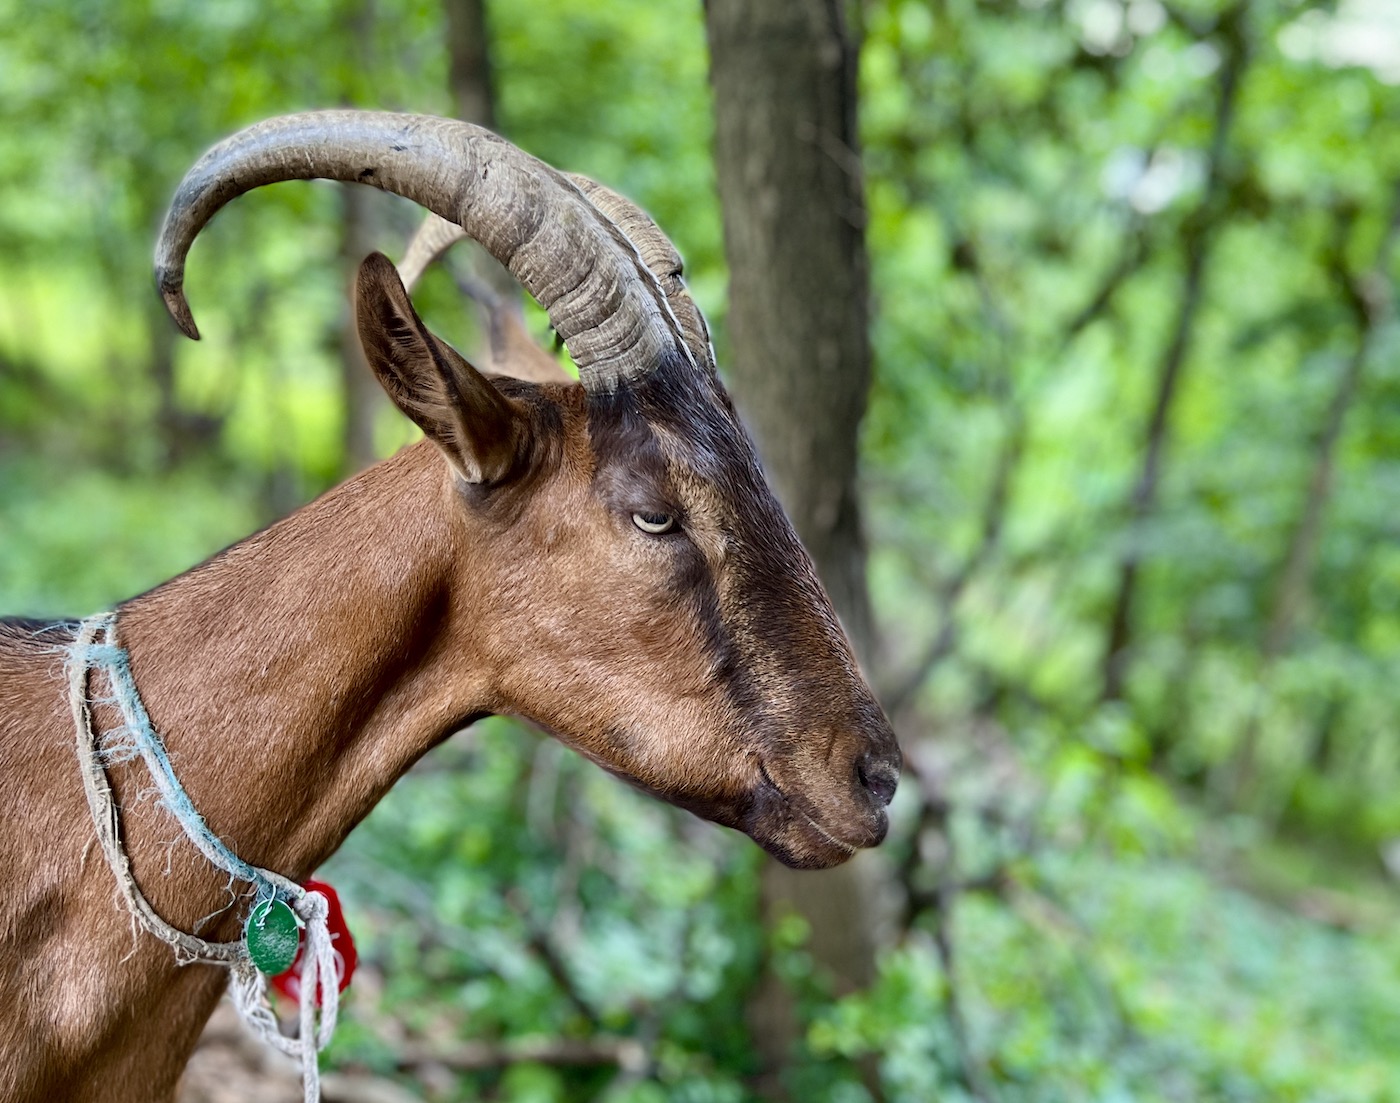 A caramel-brown goat in profile, with a bright green leafy background.